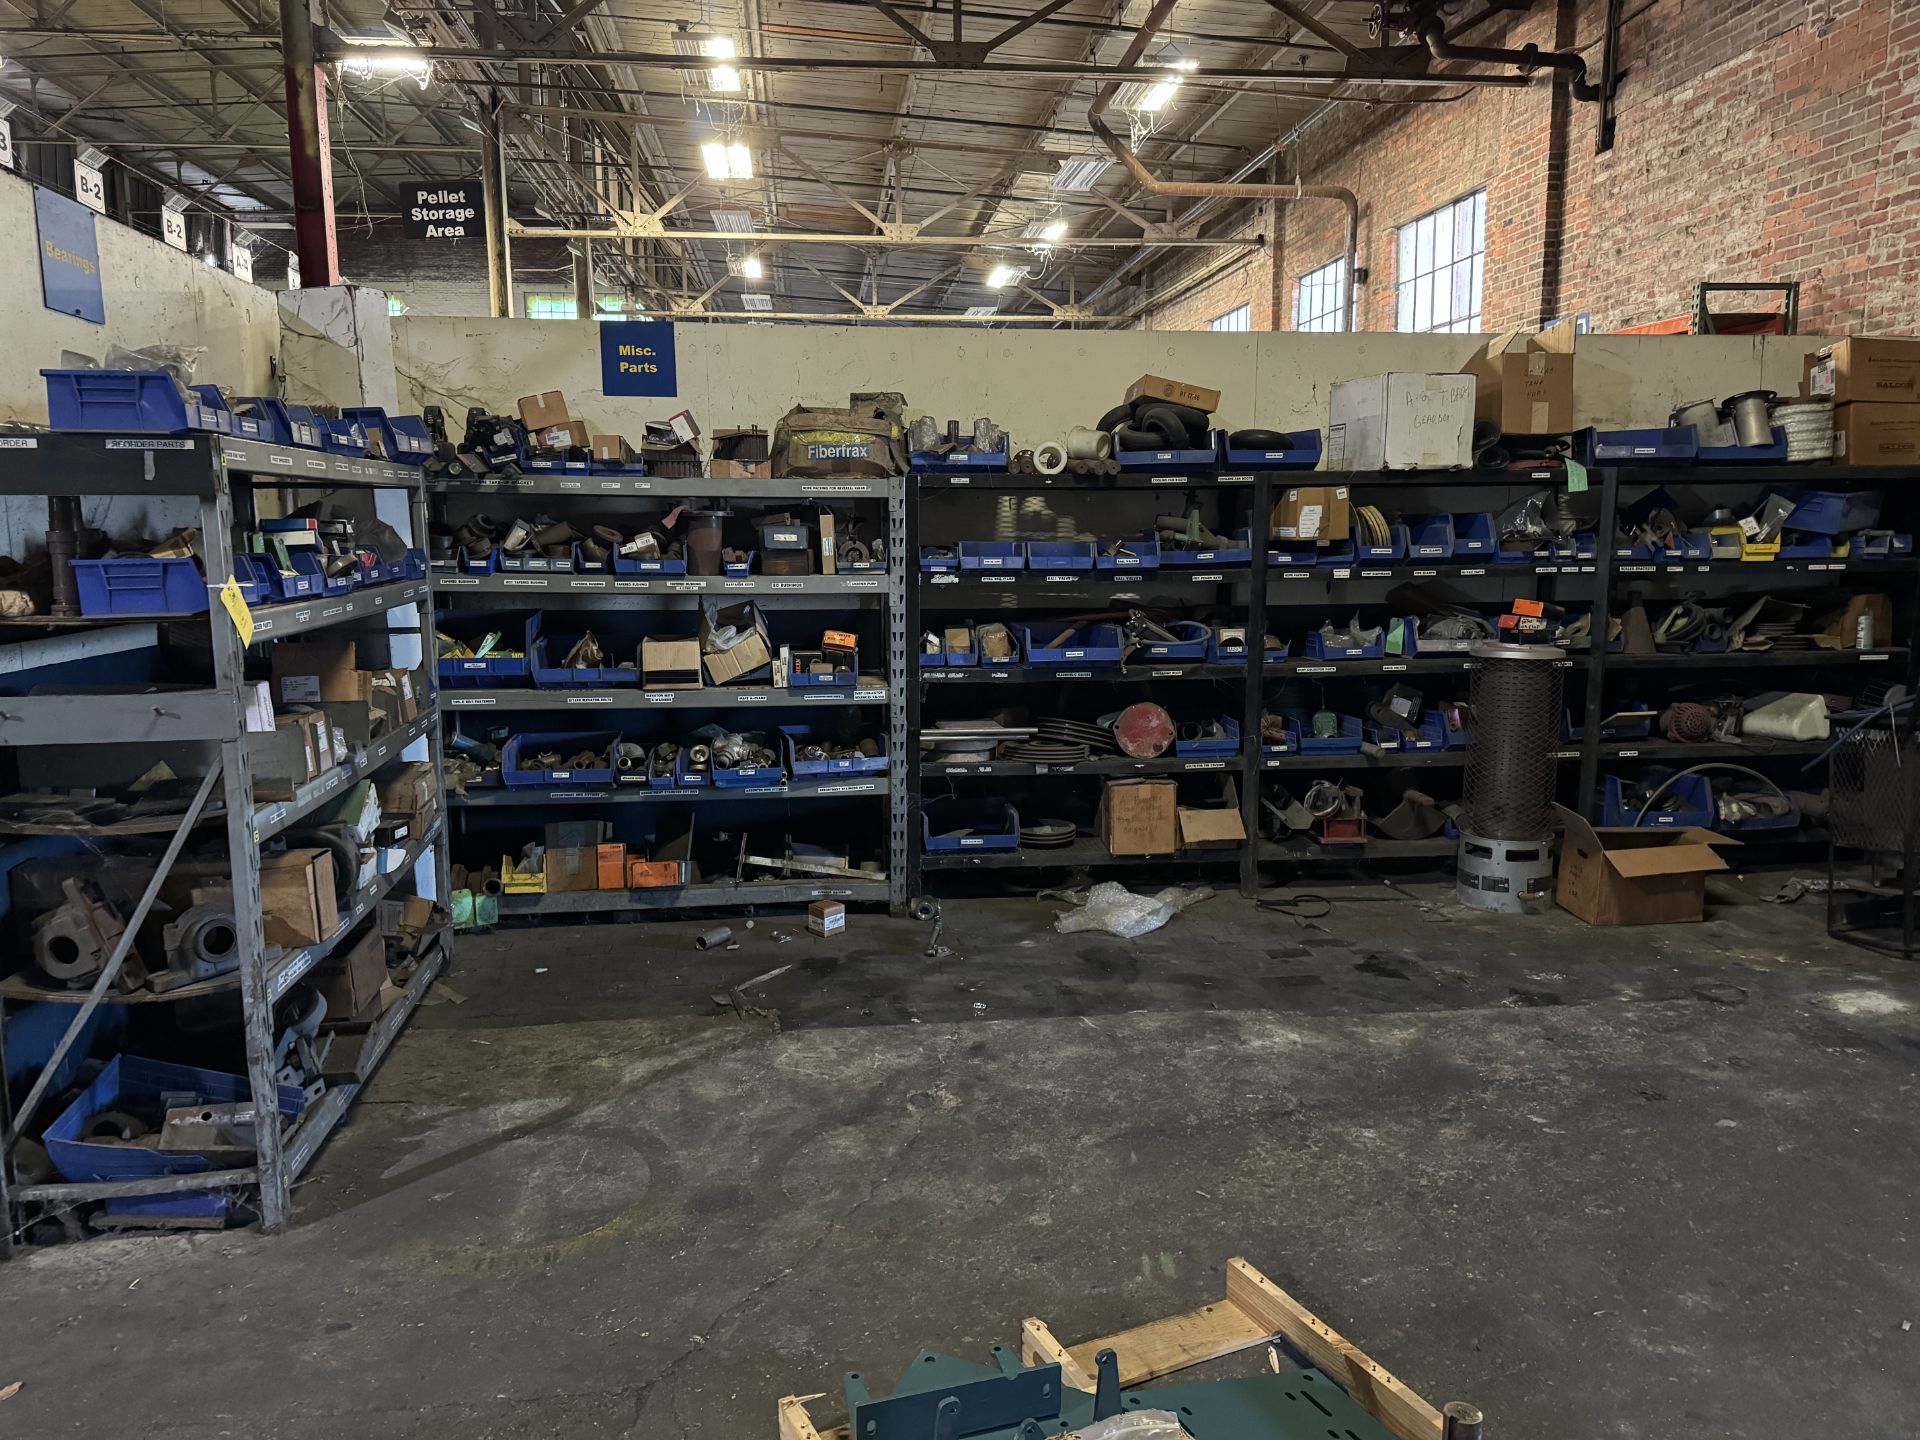 Shelving and Contents (All Photoed), Rigging/ Removal Fee - $2,150